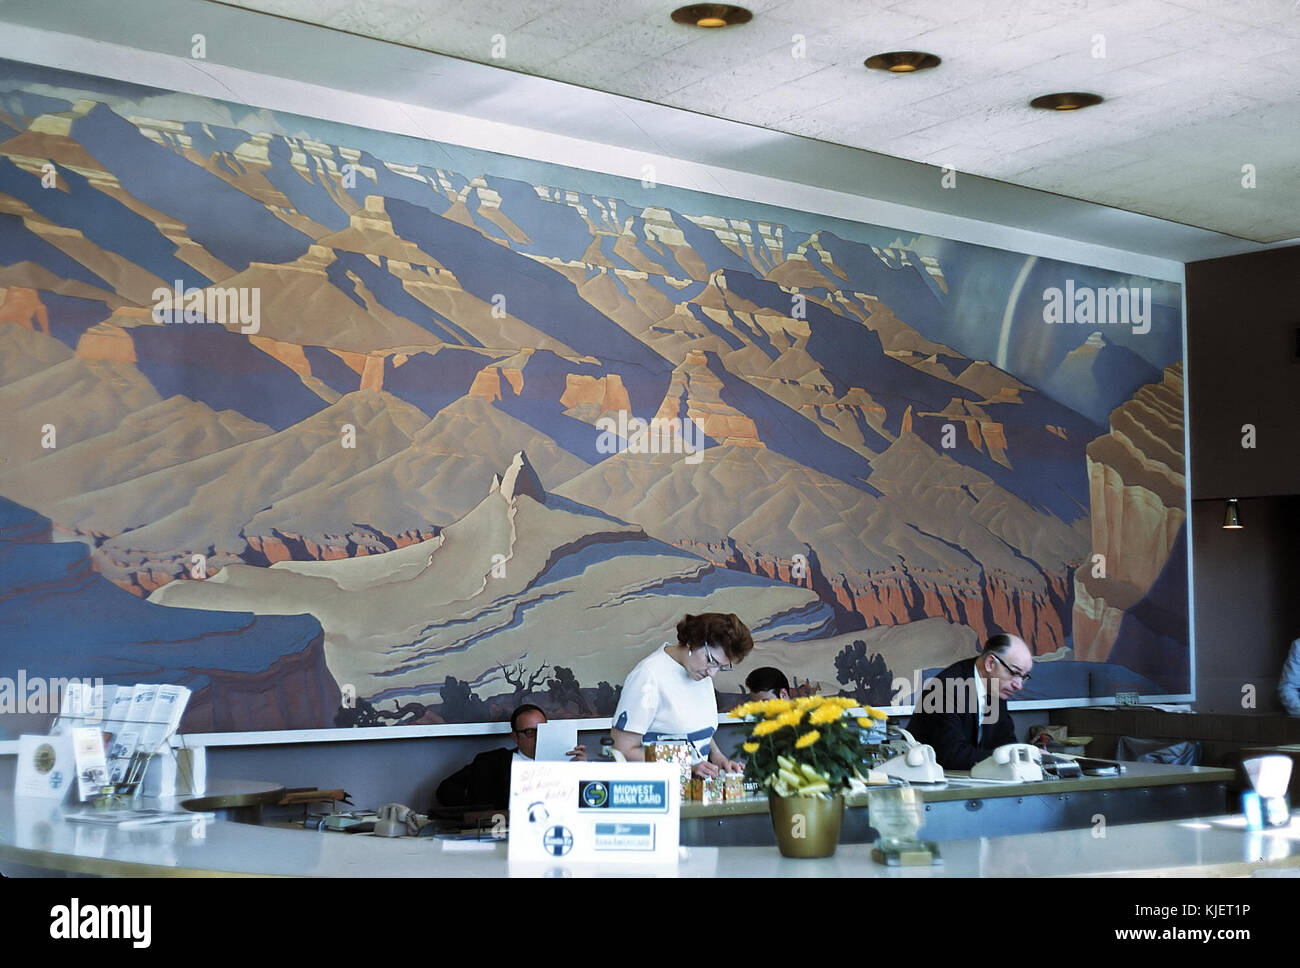 ATSF interior of Travel Center showing Grand Canyon mural, Chicago, Illinois on June 13, 1968 (22535997330) Stock Photo